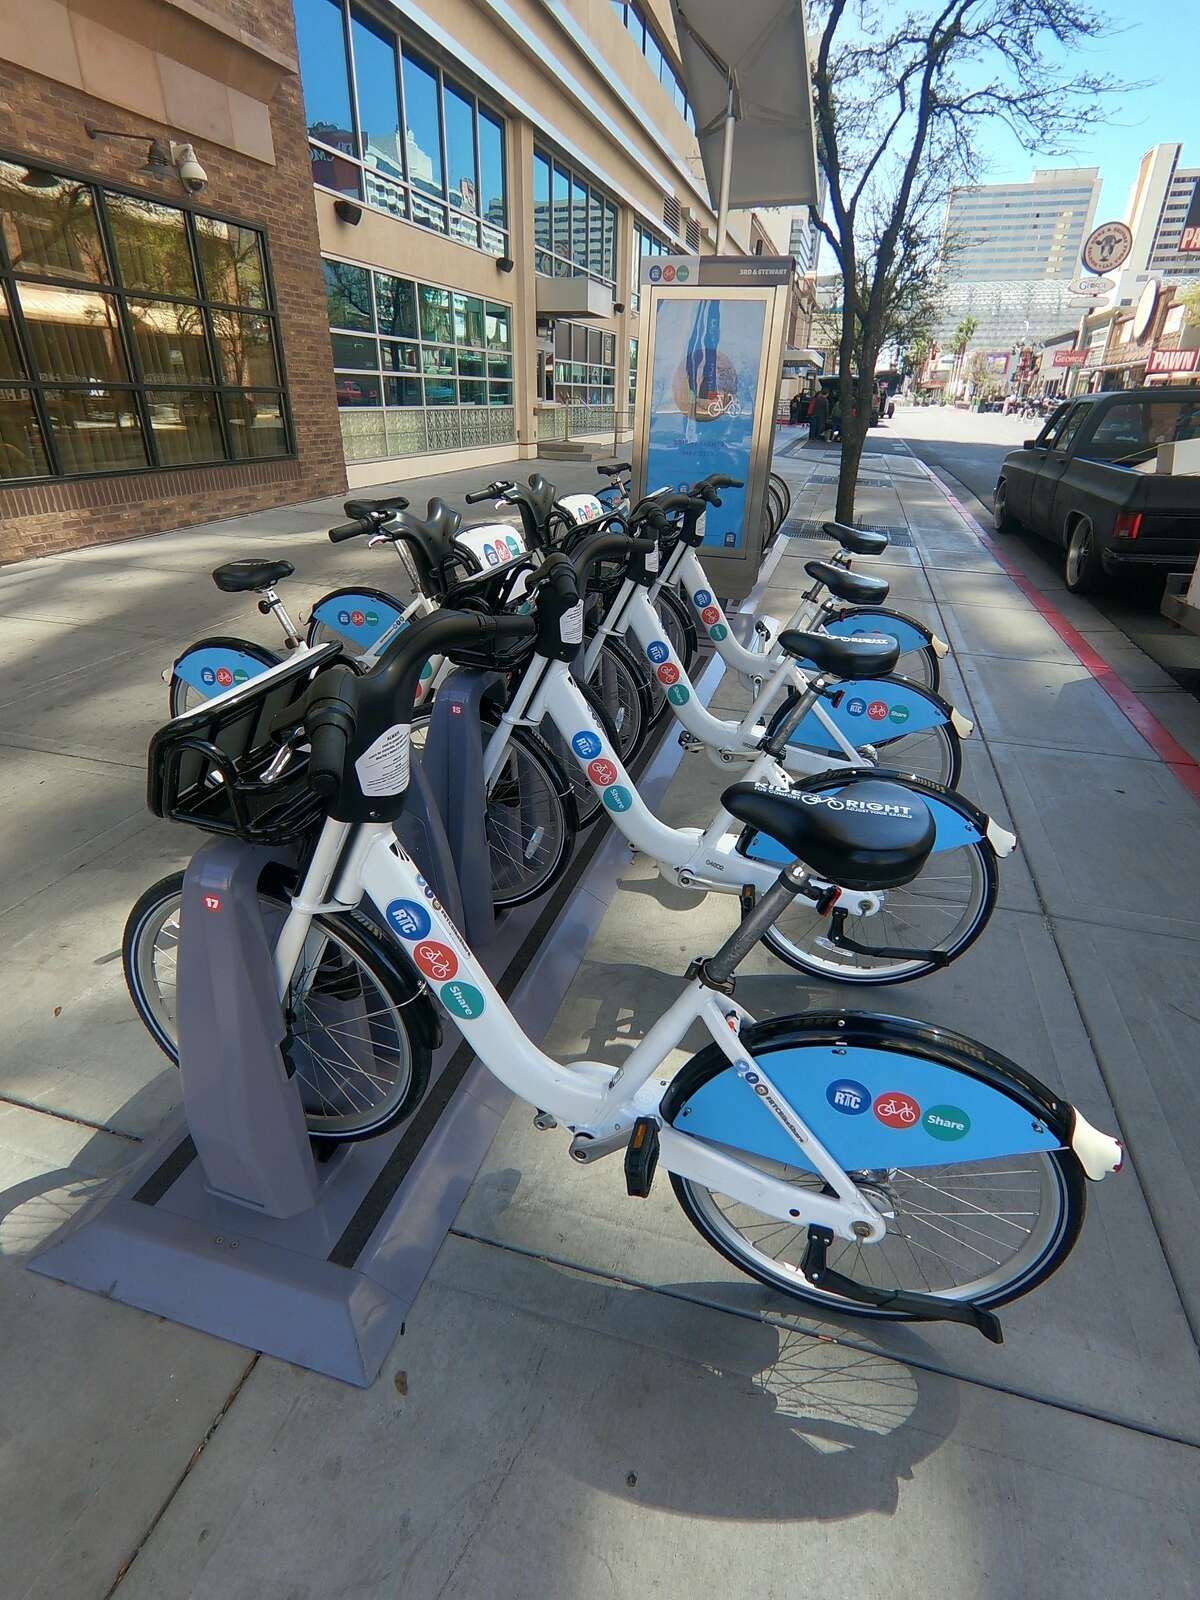 Currently there are 21 RTC Bike Share stations with 180 bikes in the Downtown Las Vegas area, stretching from the Neon Museum to the Stratosphere.